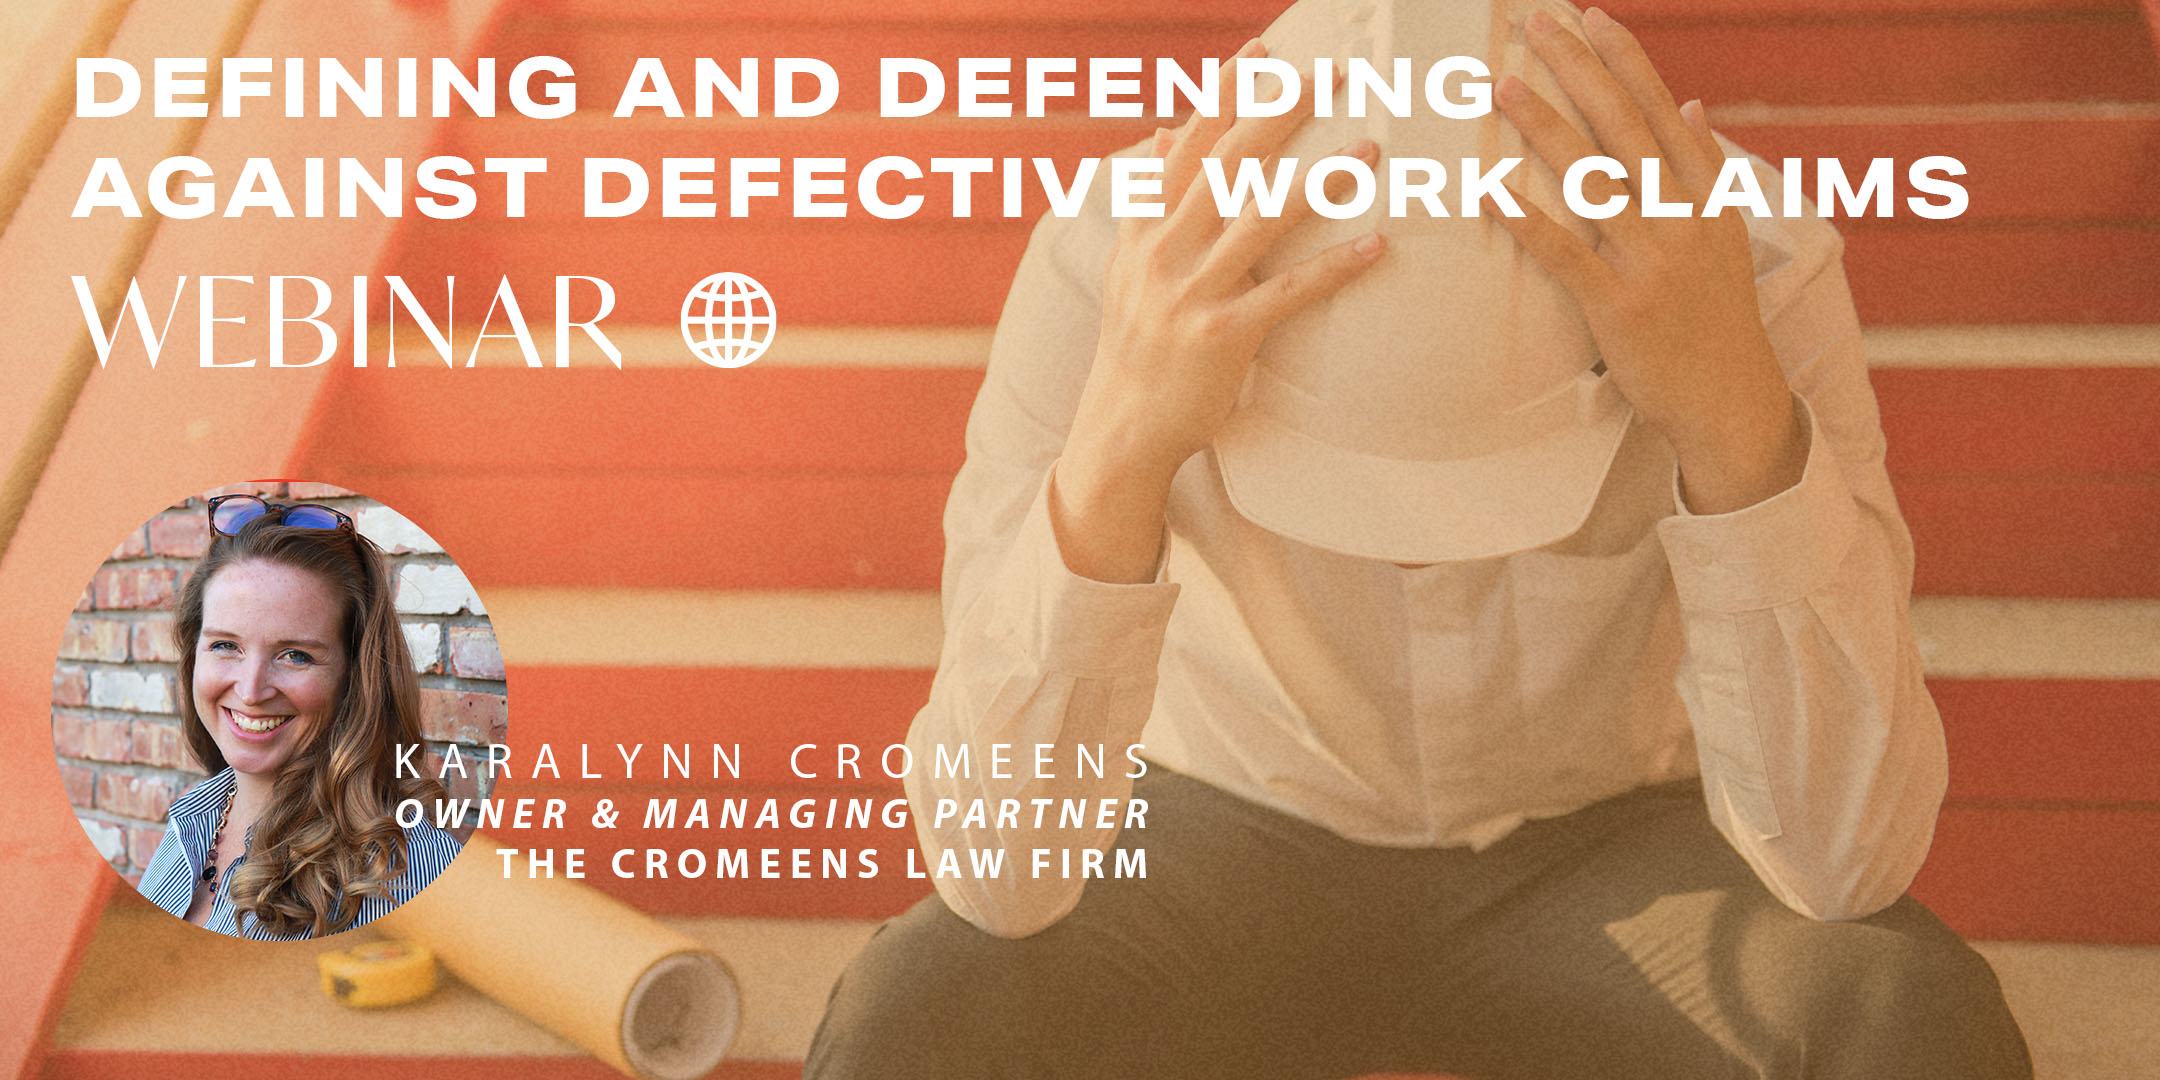 Defining and Defending Against Defective Work Claims Webinar. May 26th